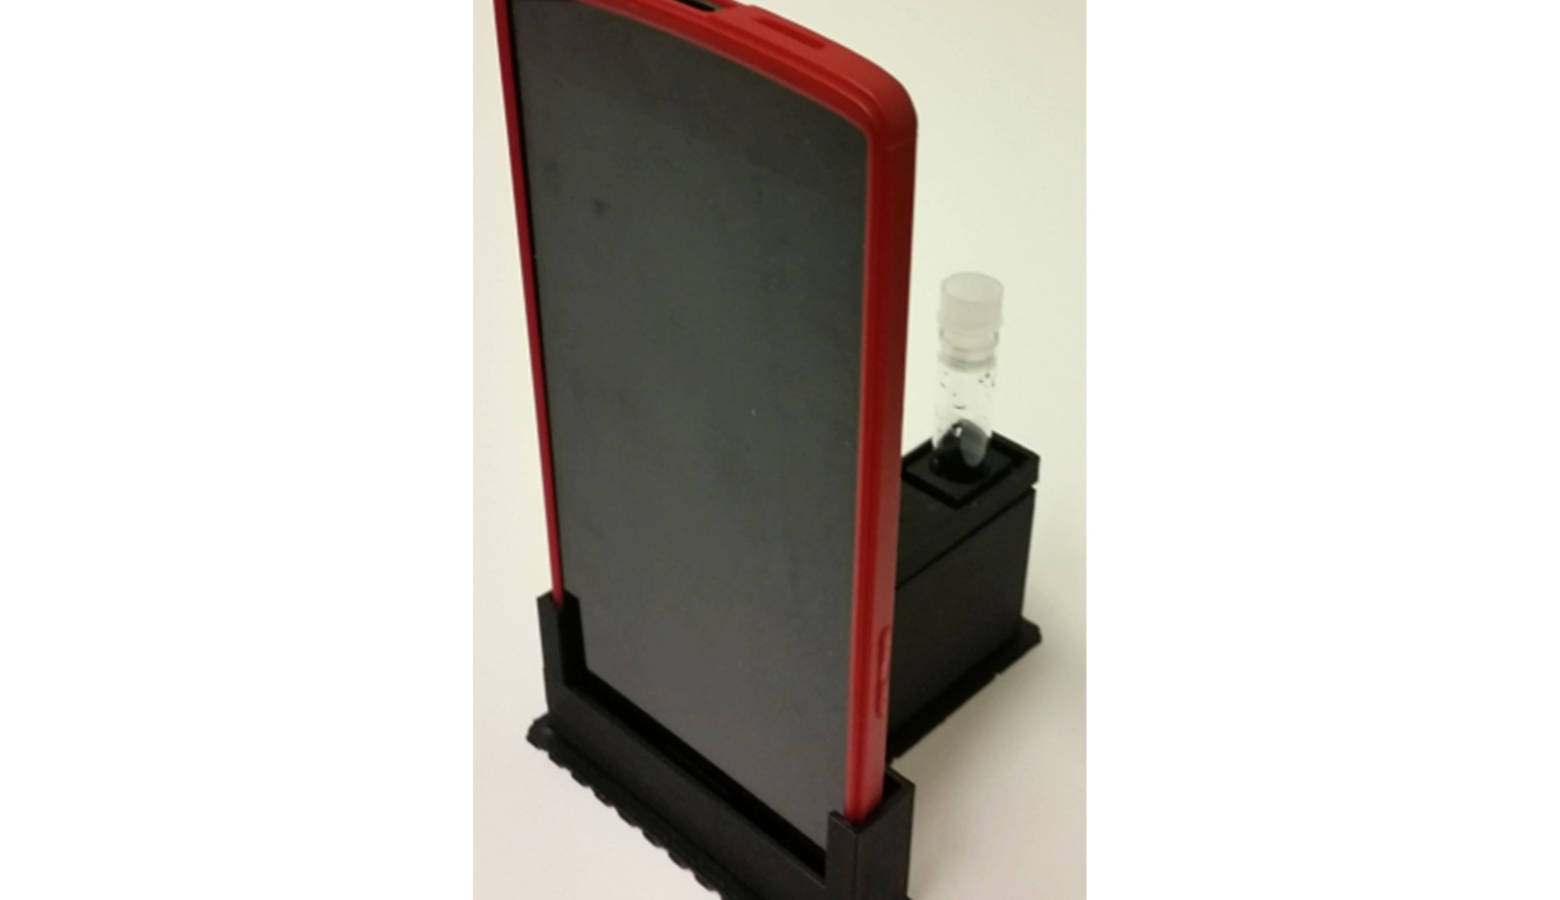 The cradle uses the phone's camera to detect low light from E. coli. (Photo courtesy of Purdue University)